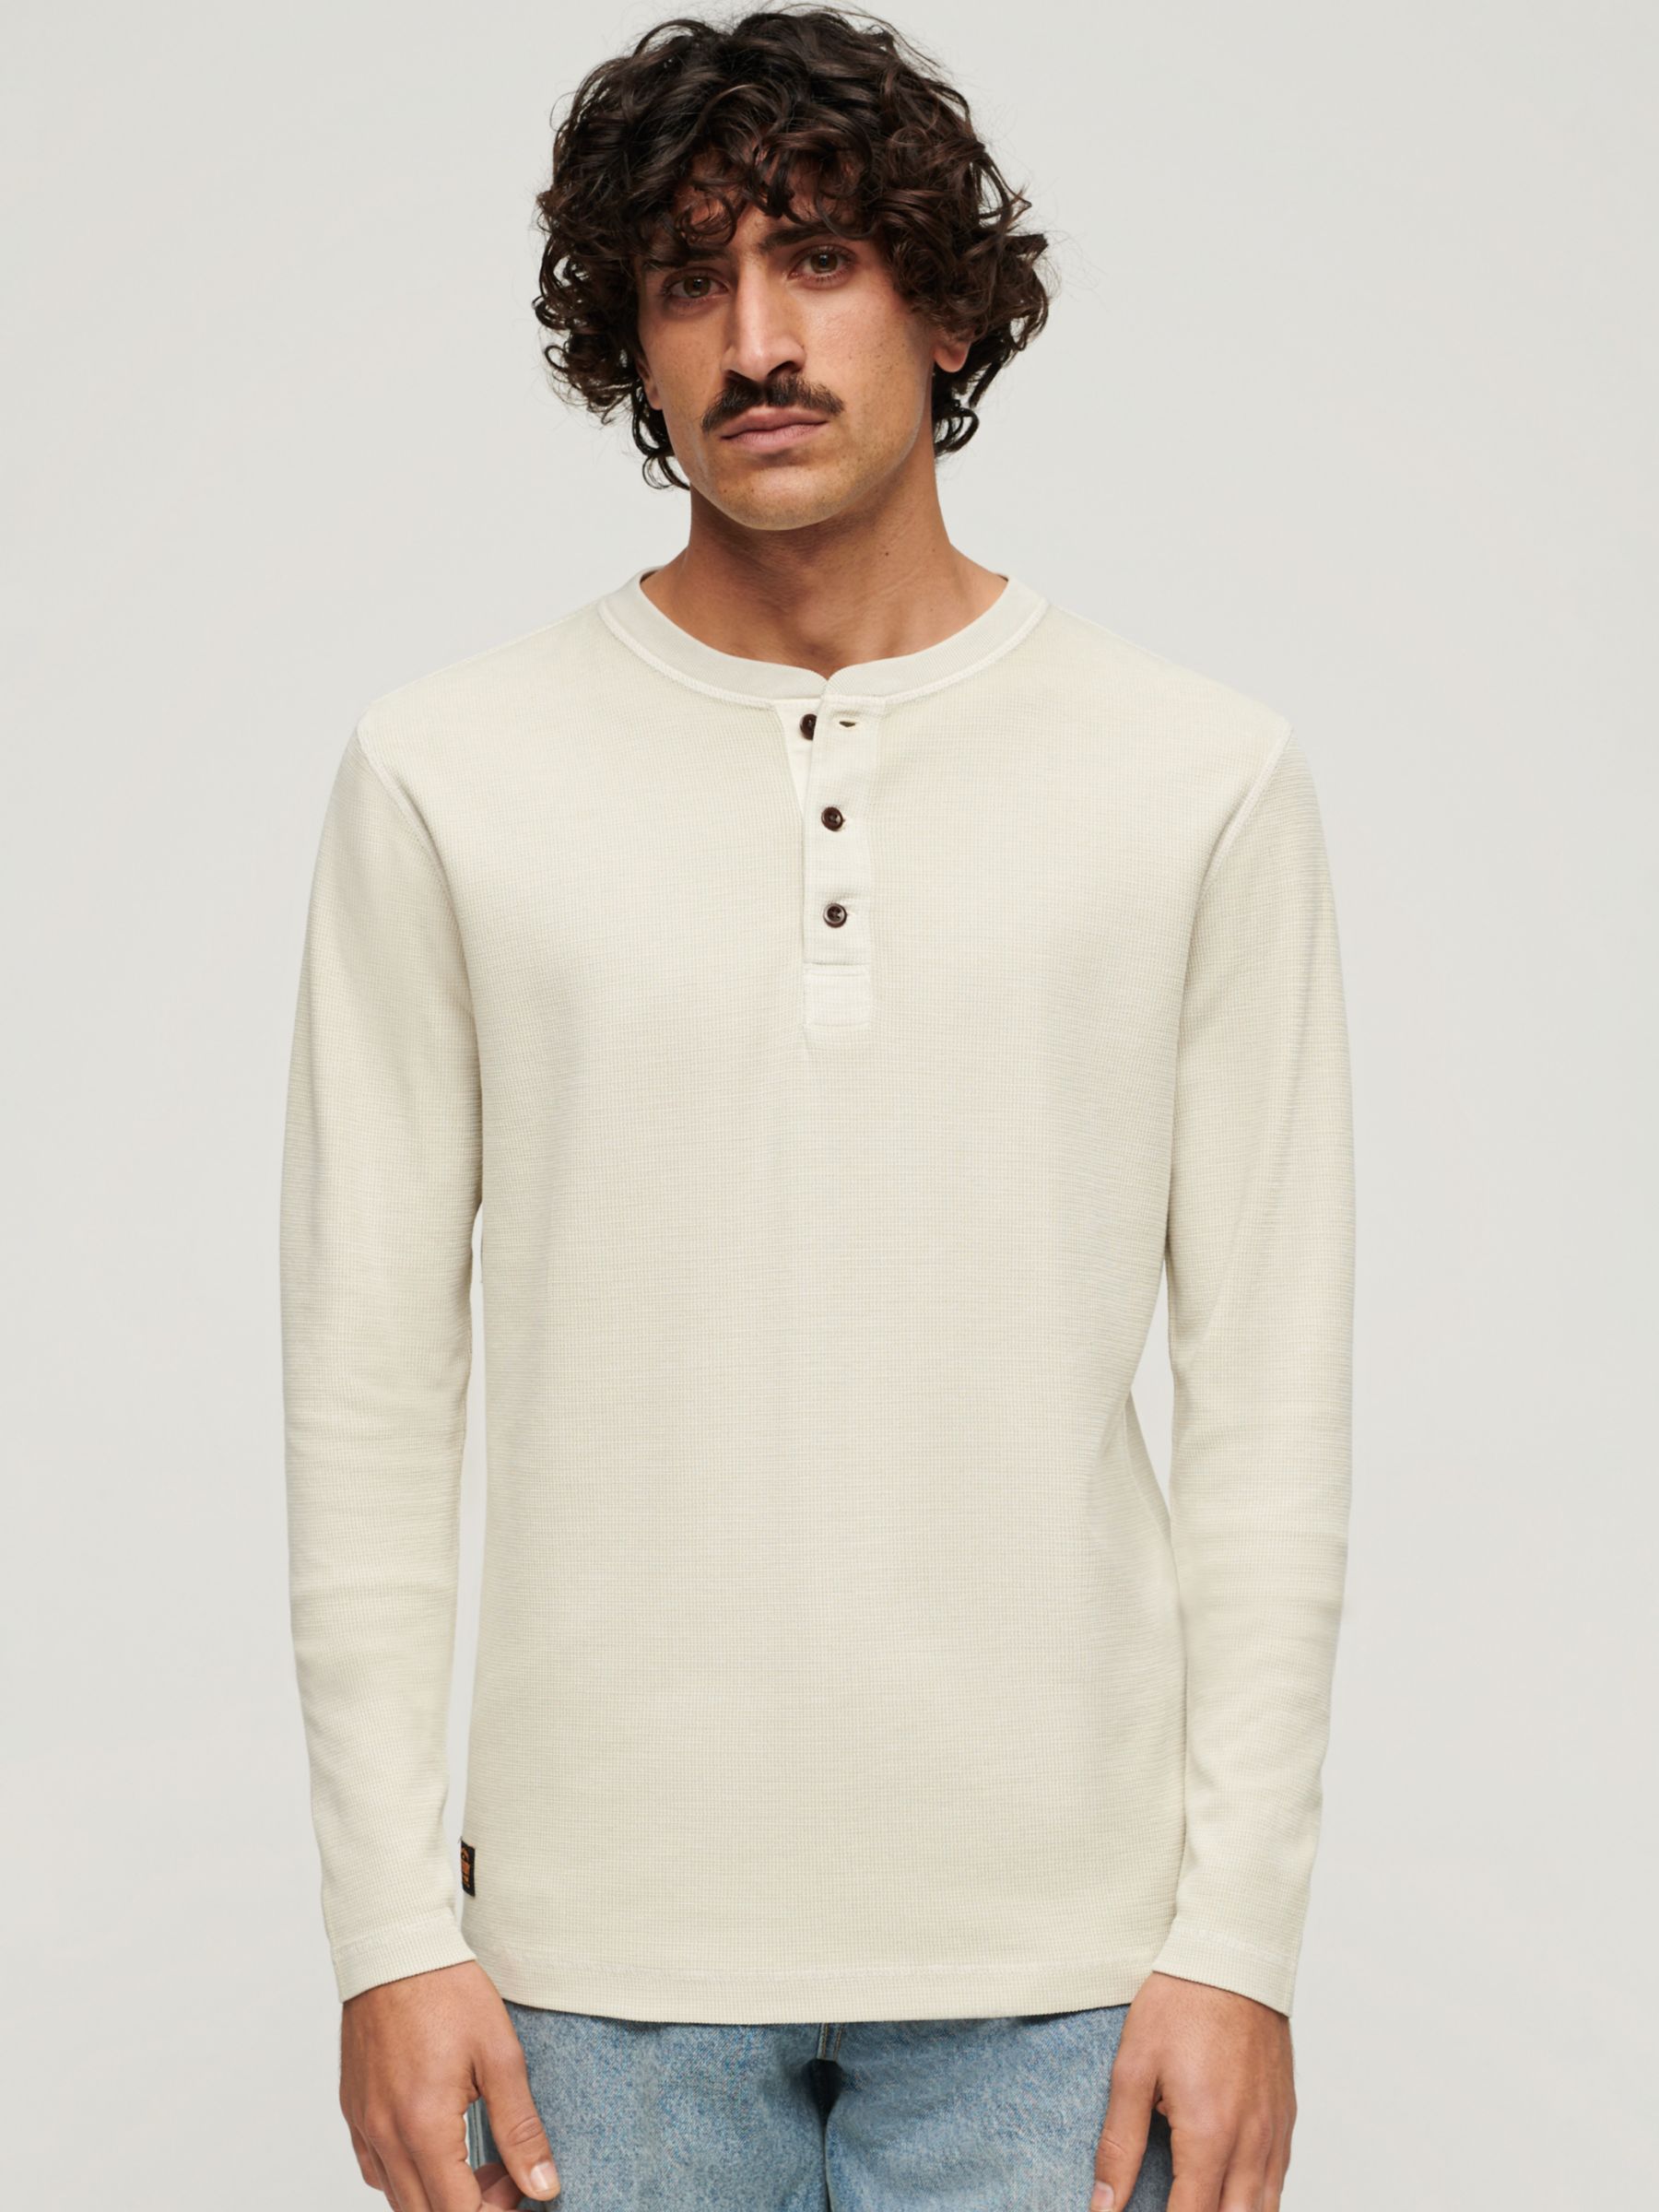 Superdry Relaxed Fit Waffle Cotton Henley Top, Light Stone Beige at ...